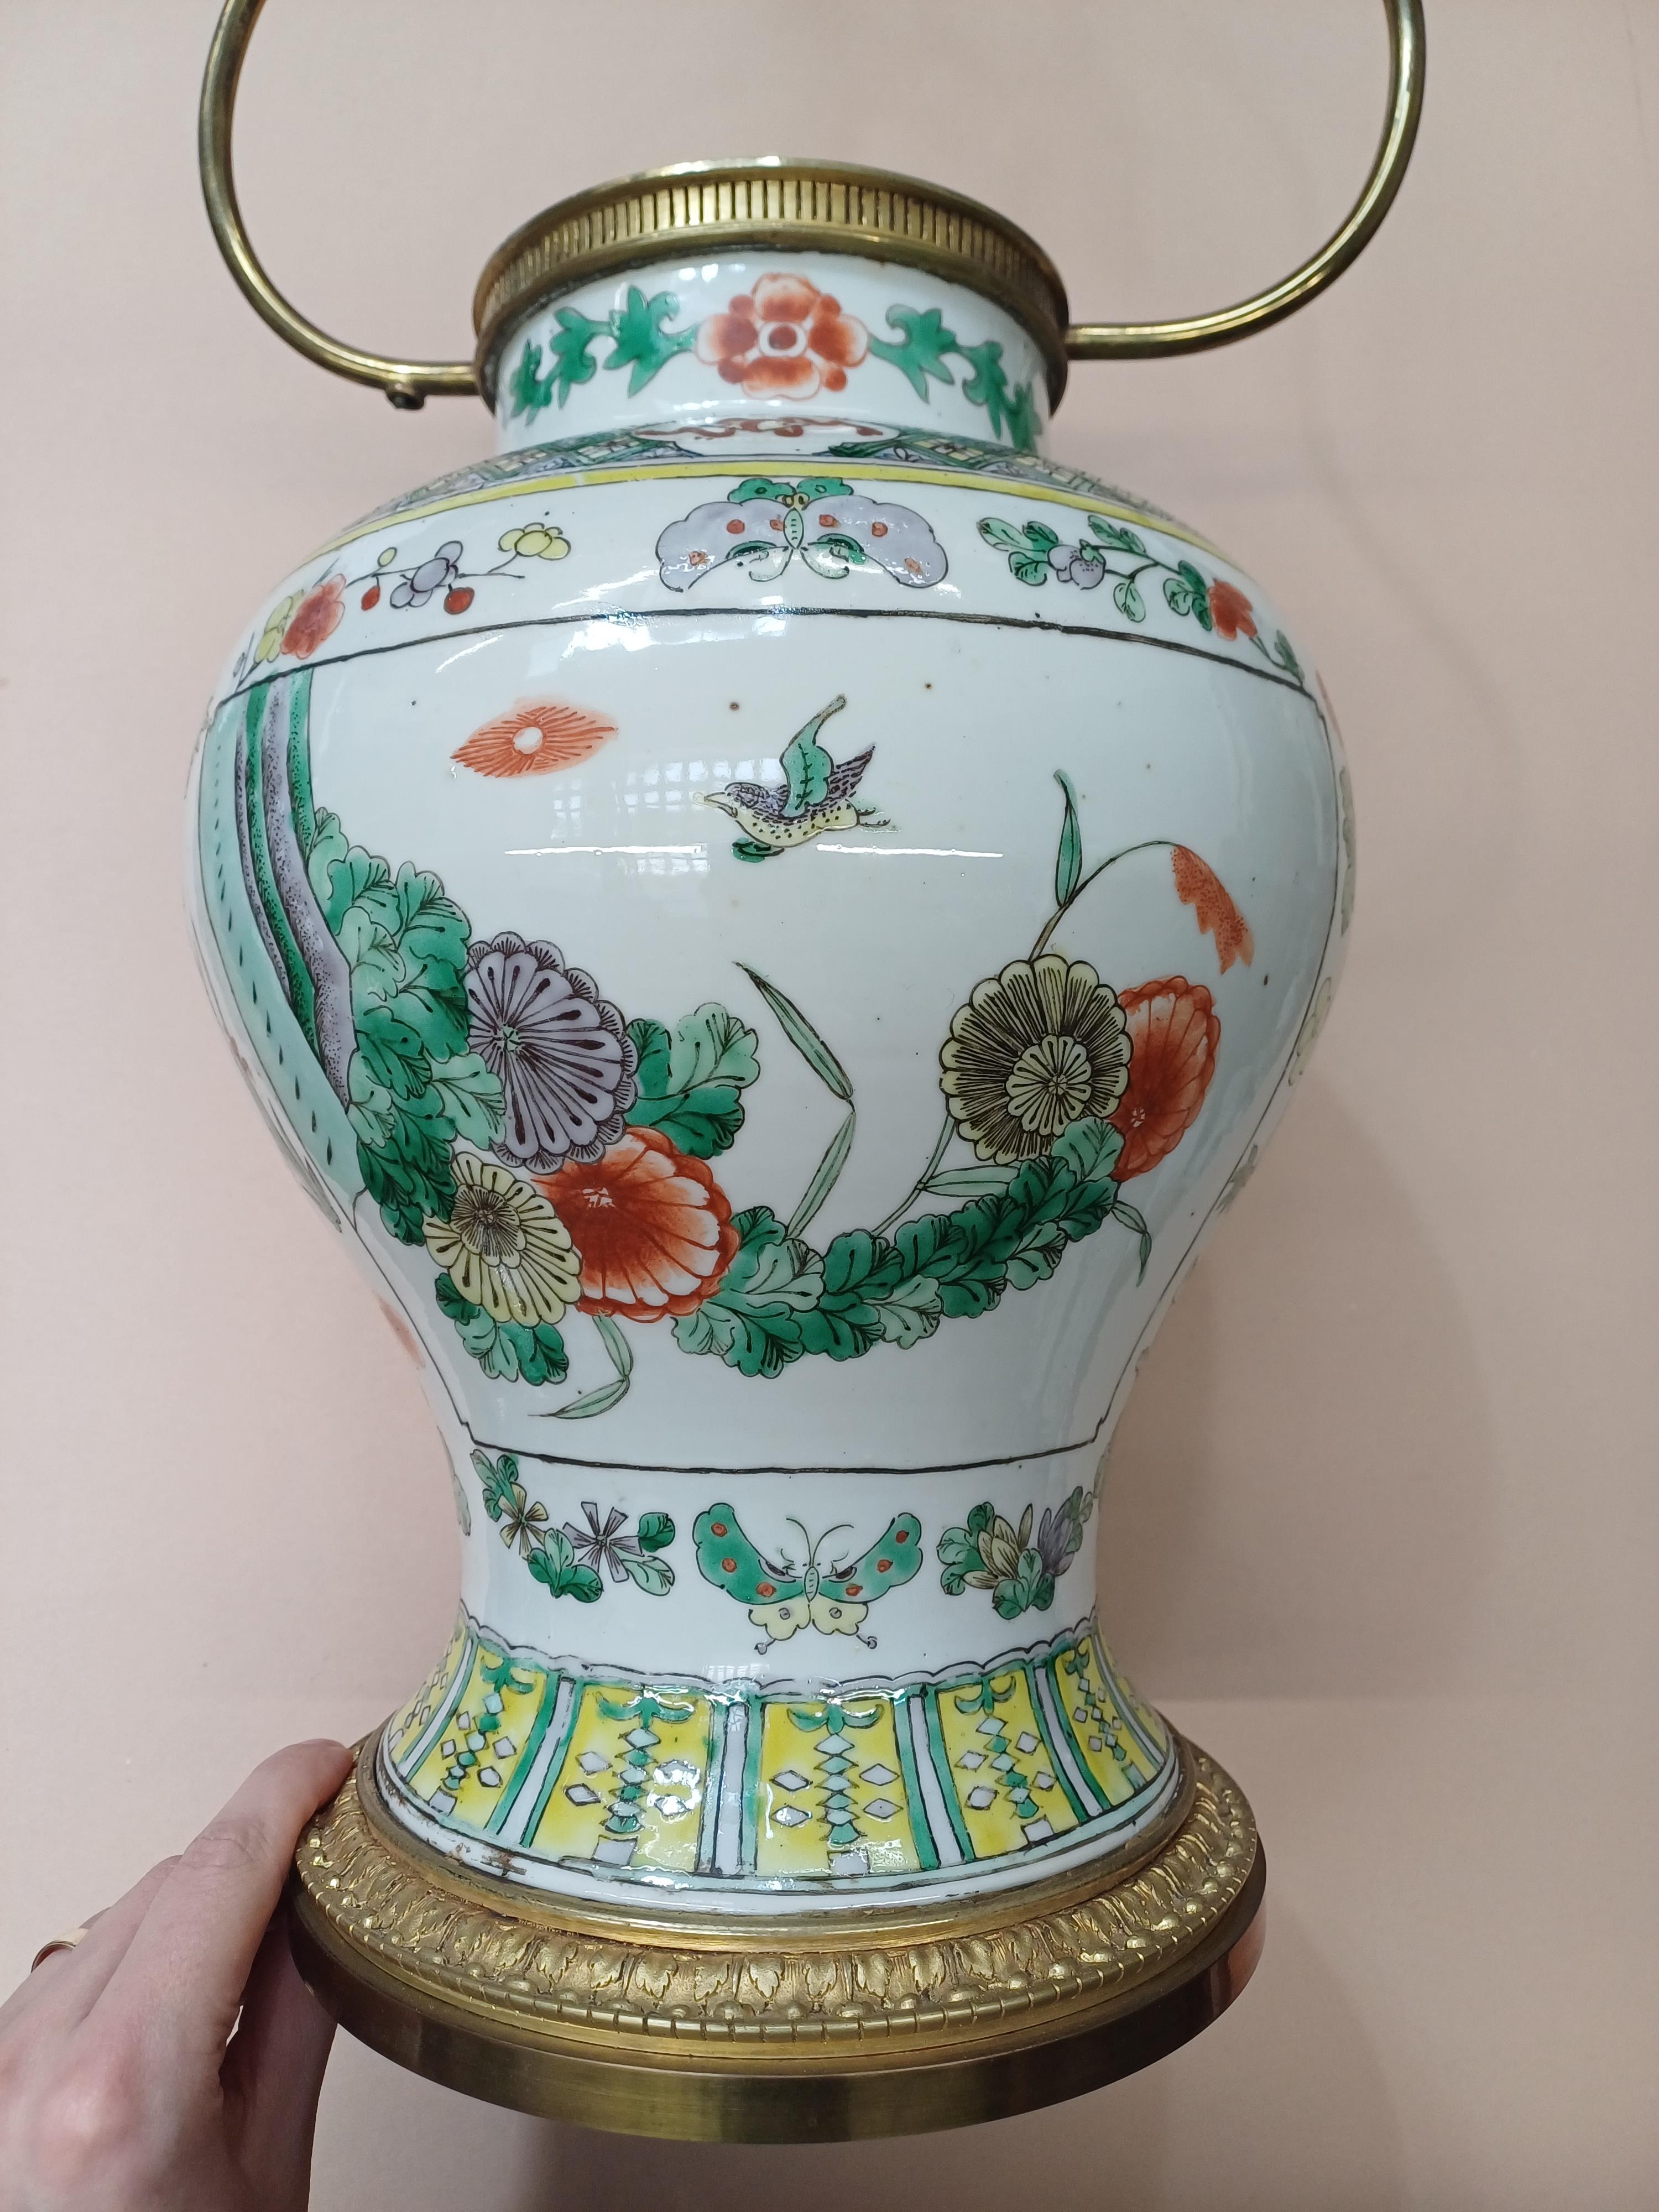 A CHINESE FAMILLE-VERTE 'LOTUS POND' VASE AND COVER 晚清五彩蓮池紋將軍罐 - Image 9 of 14